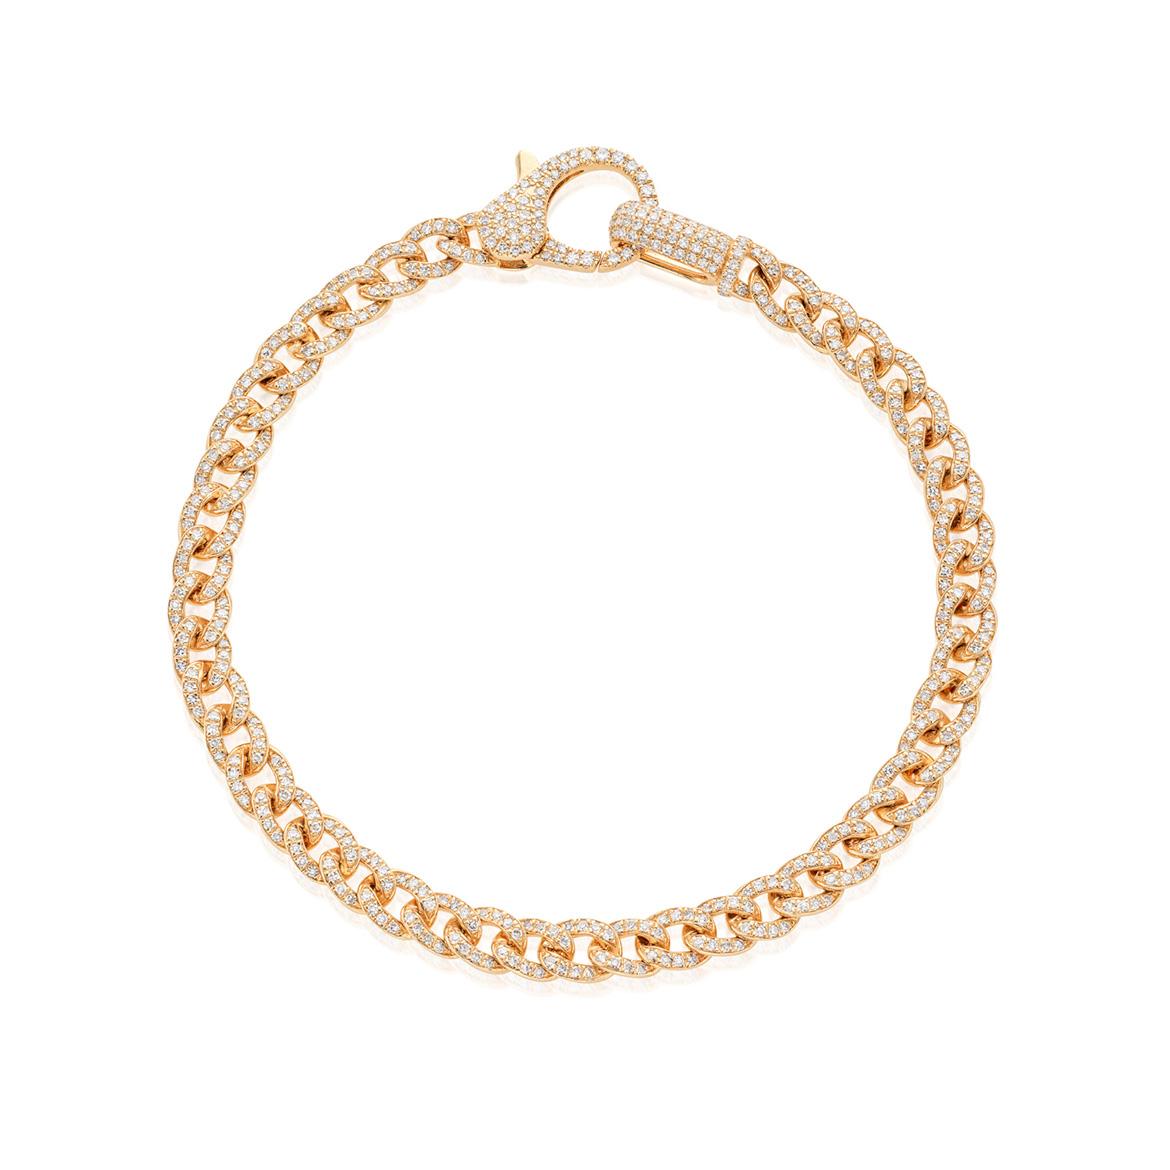 Pave Diamond Curb Link and Clasp Bracelet in 14k Yellow Gold 0